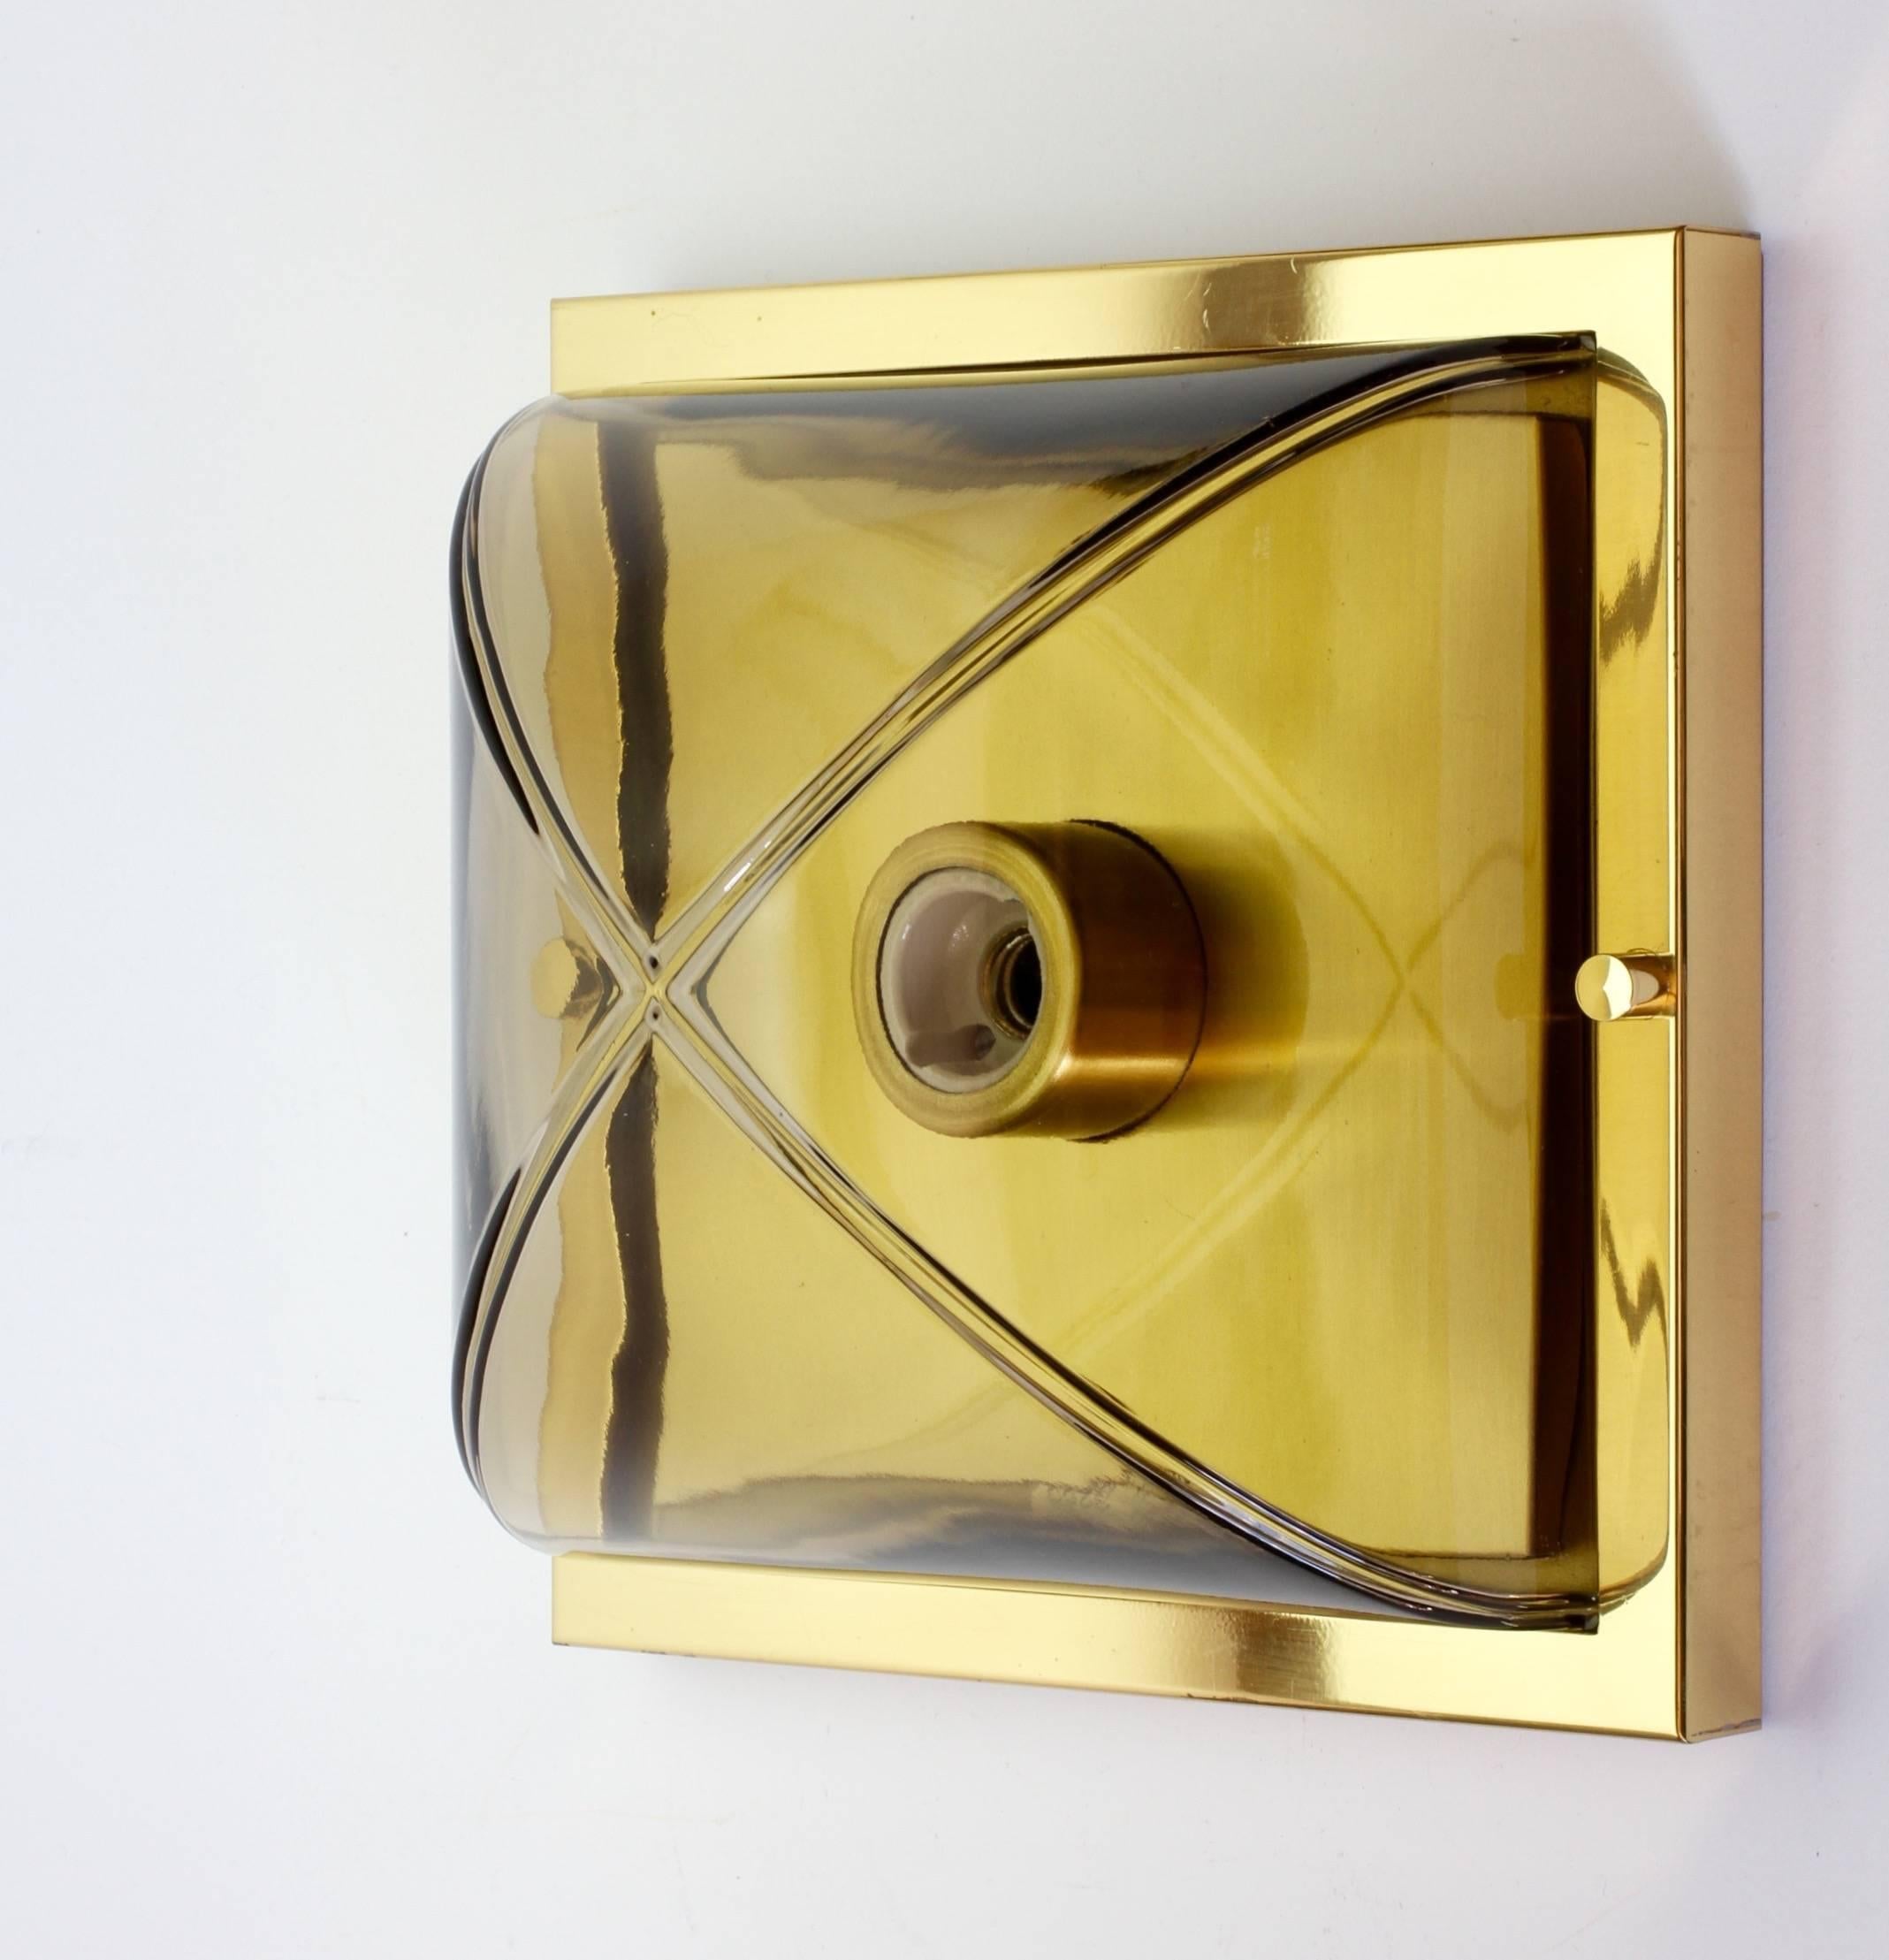 A fantastic, vintage and Minimalist German made wall or ceiling flush mount light fixture - perfect for over a vanity mirror - by Glashütte Limburg, circa 1970s / 1980s. The simple, yet striking, clean lined modernist design looks timeless and would